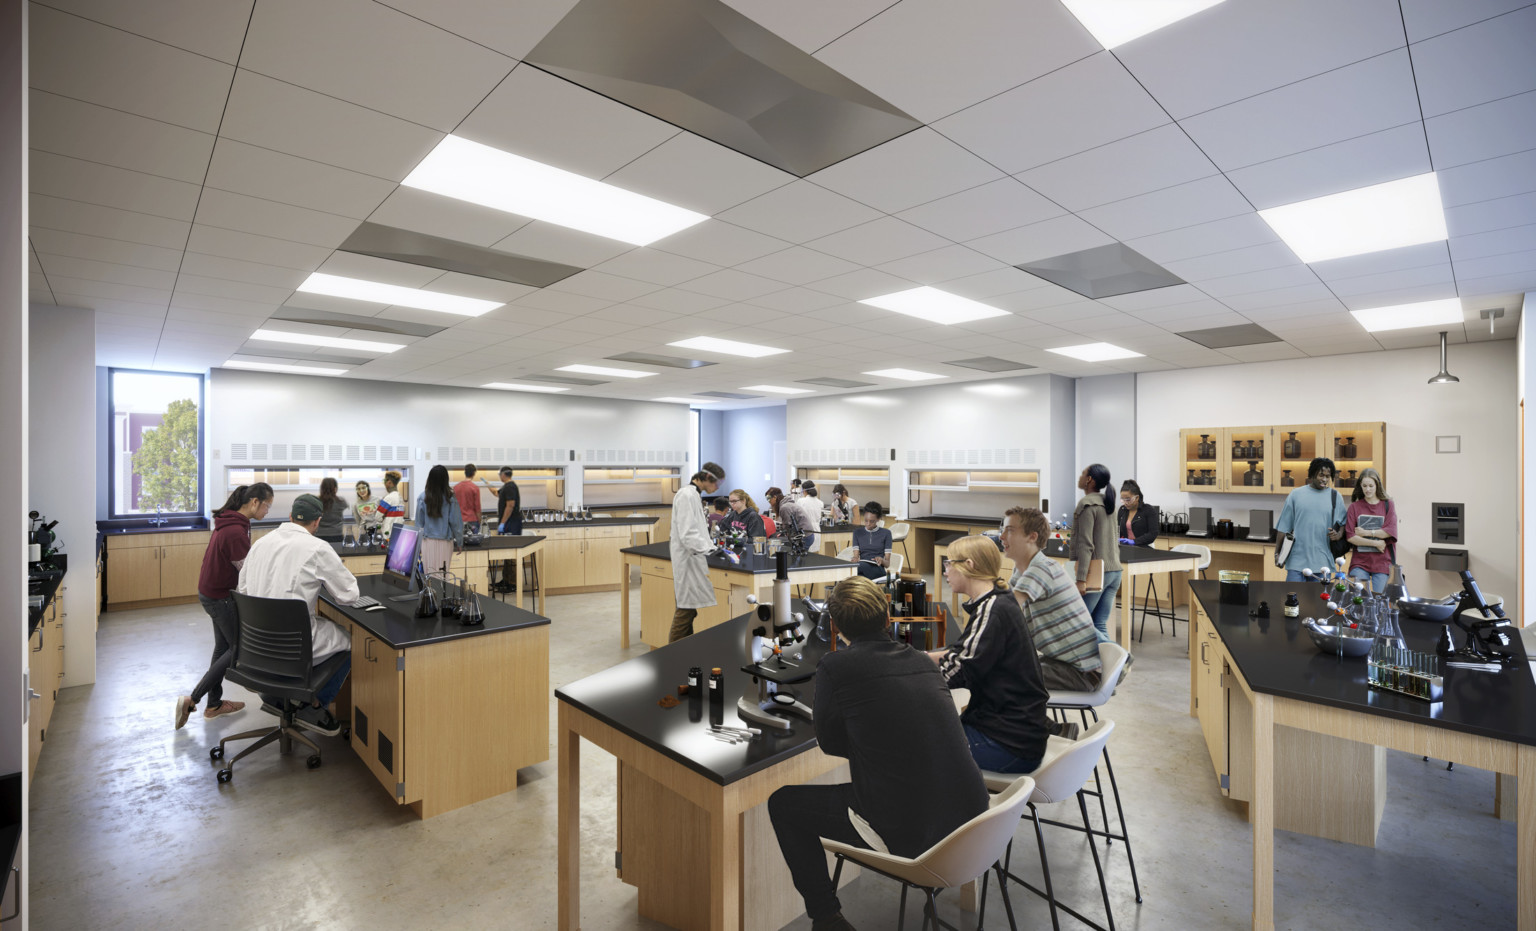 Interior view of science classroom with lab tables and seating, counter space and storage line the walls